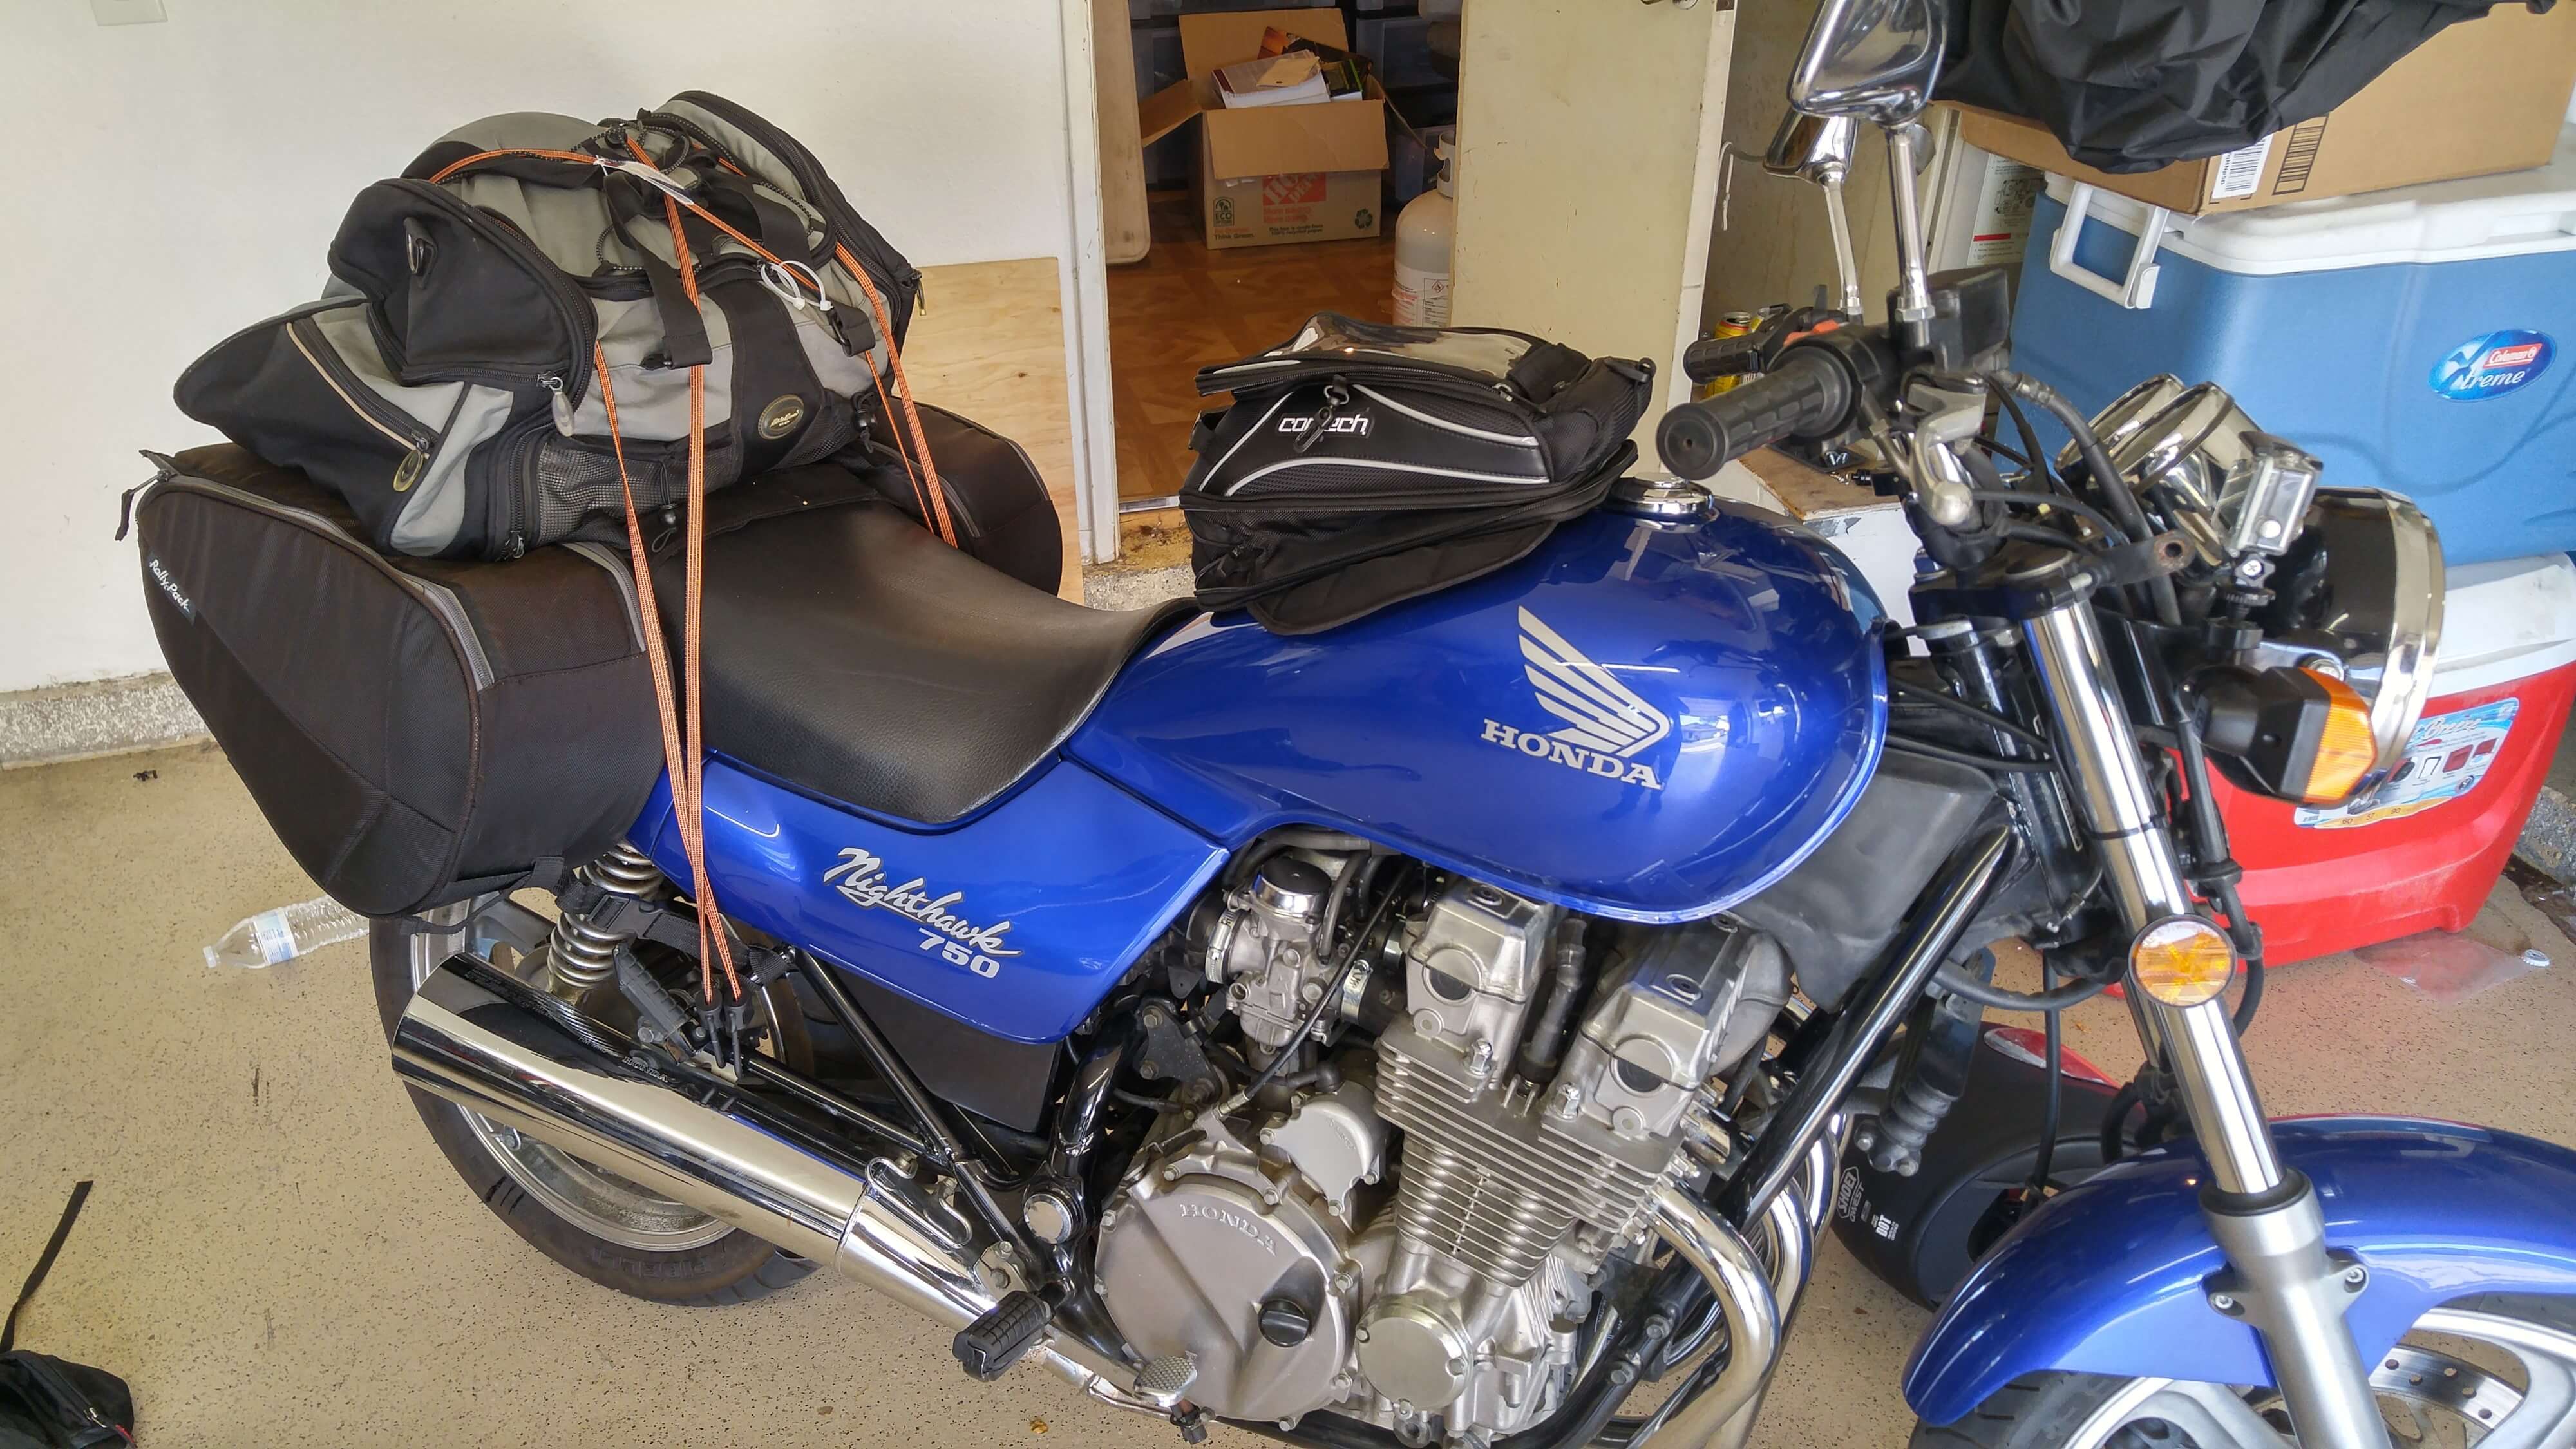 1993 Honda Nighthawk motorcycle all packed up for a long ride